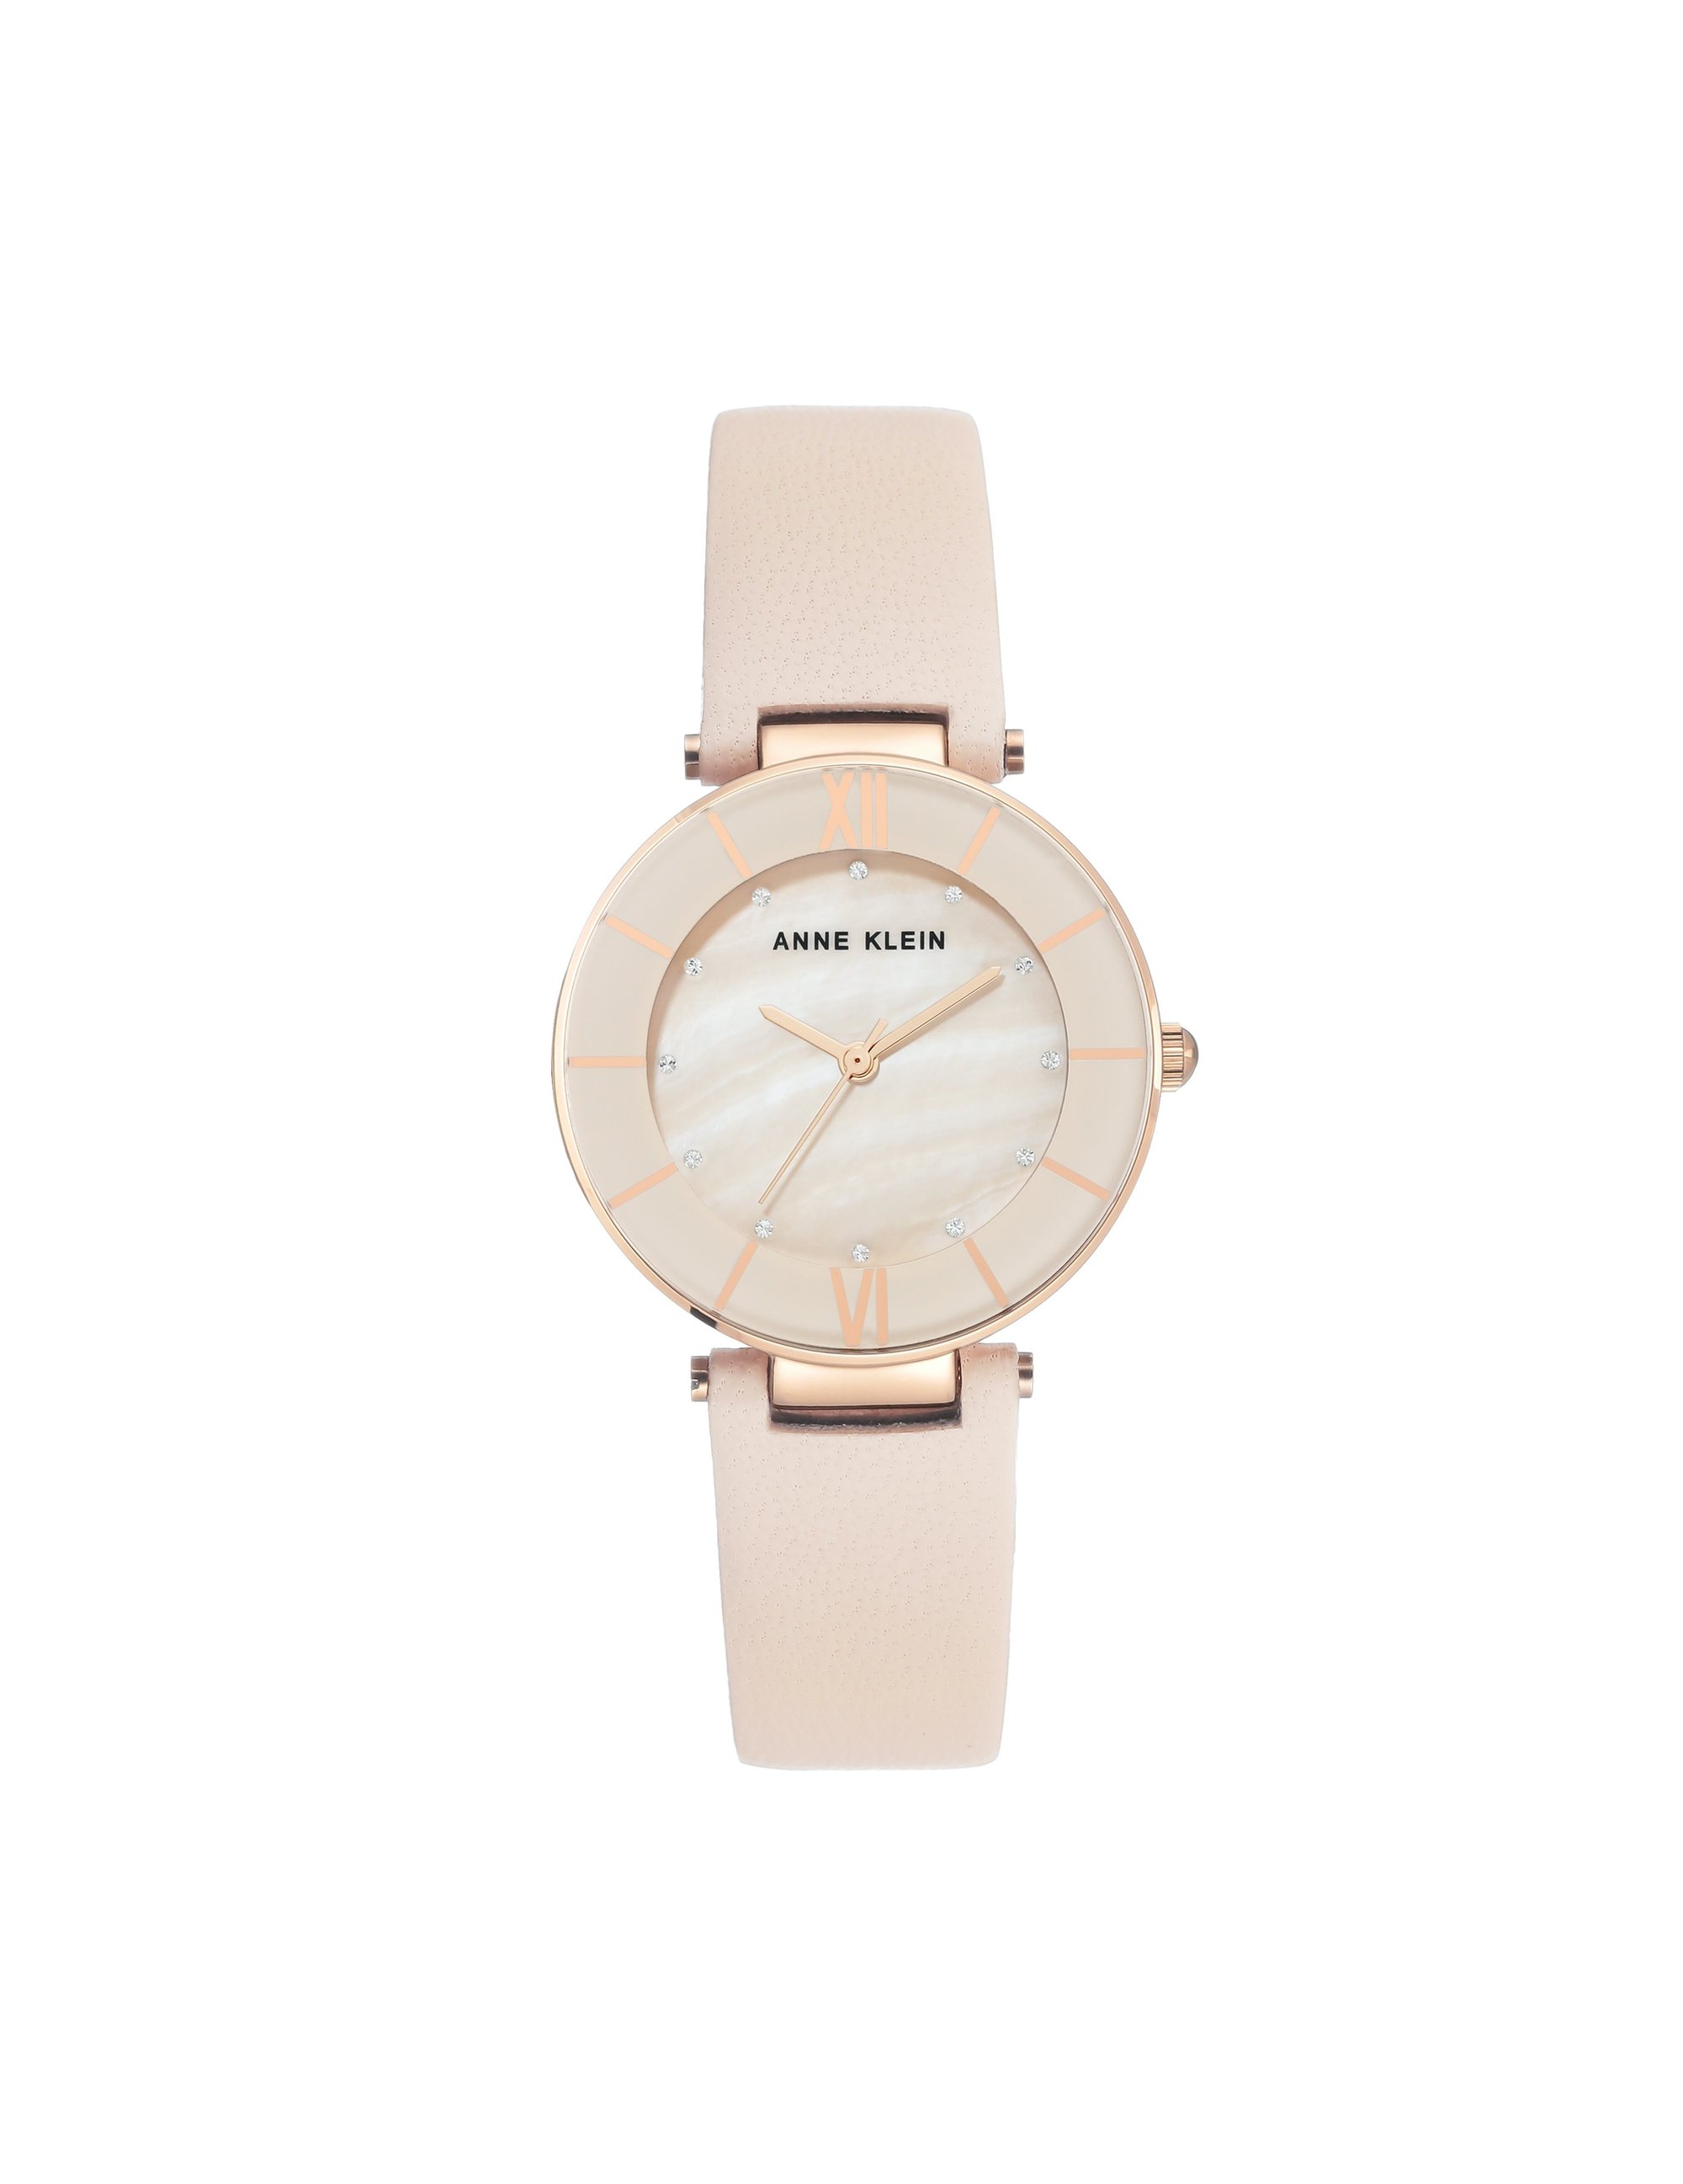 light pink rose gold-tone swarovski crystal accented leather strap watch